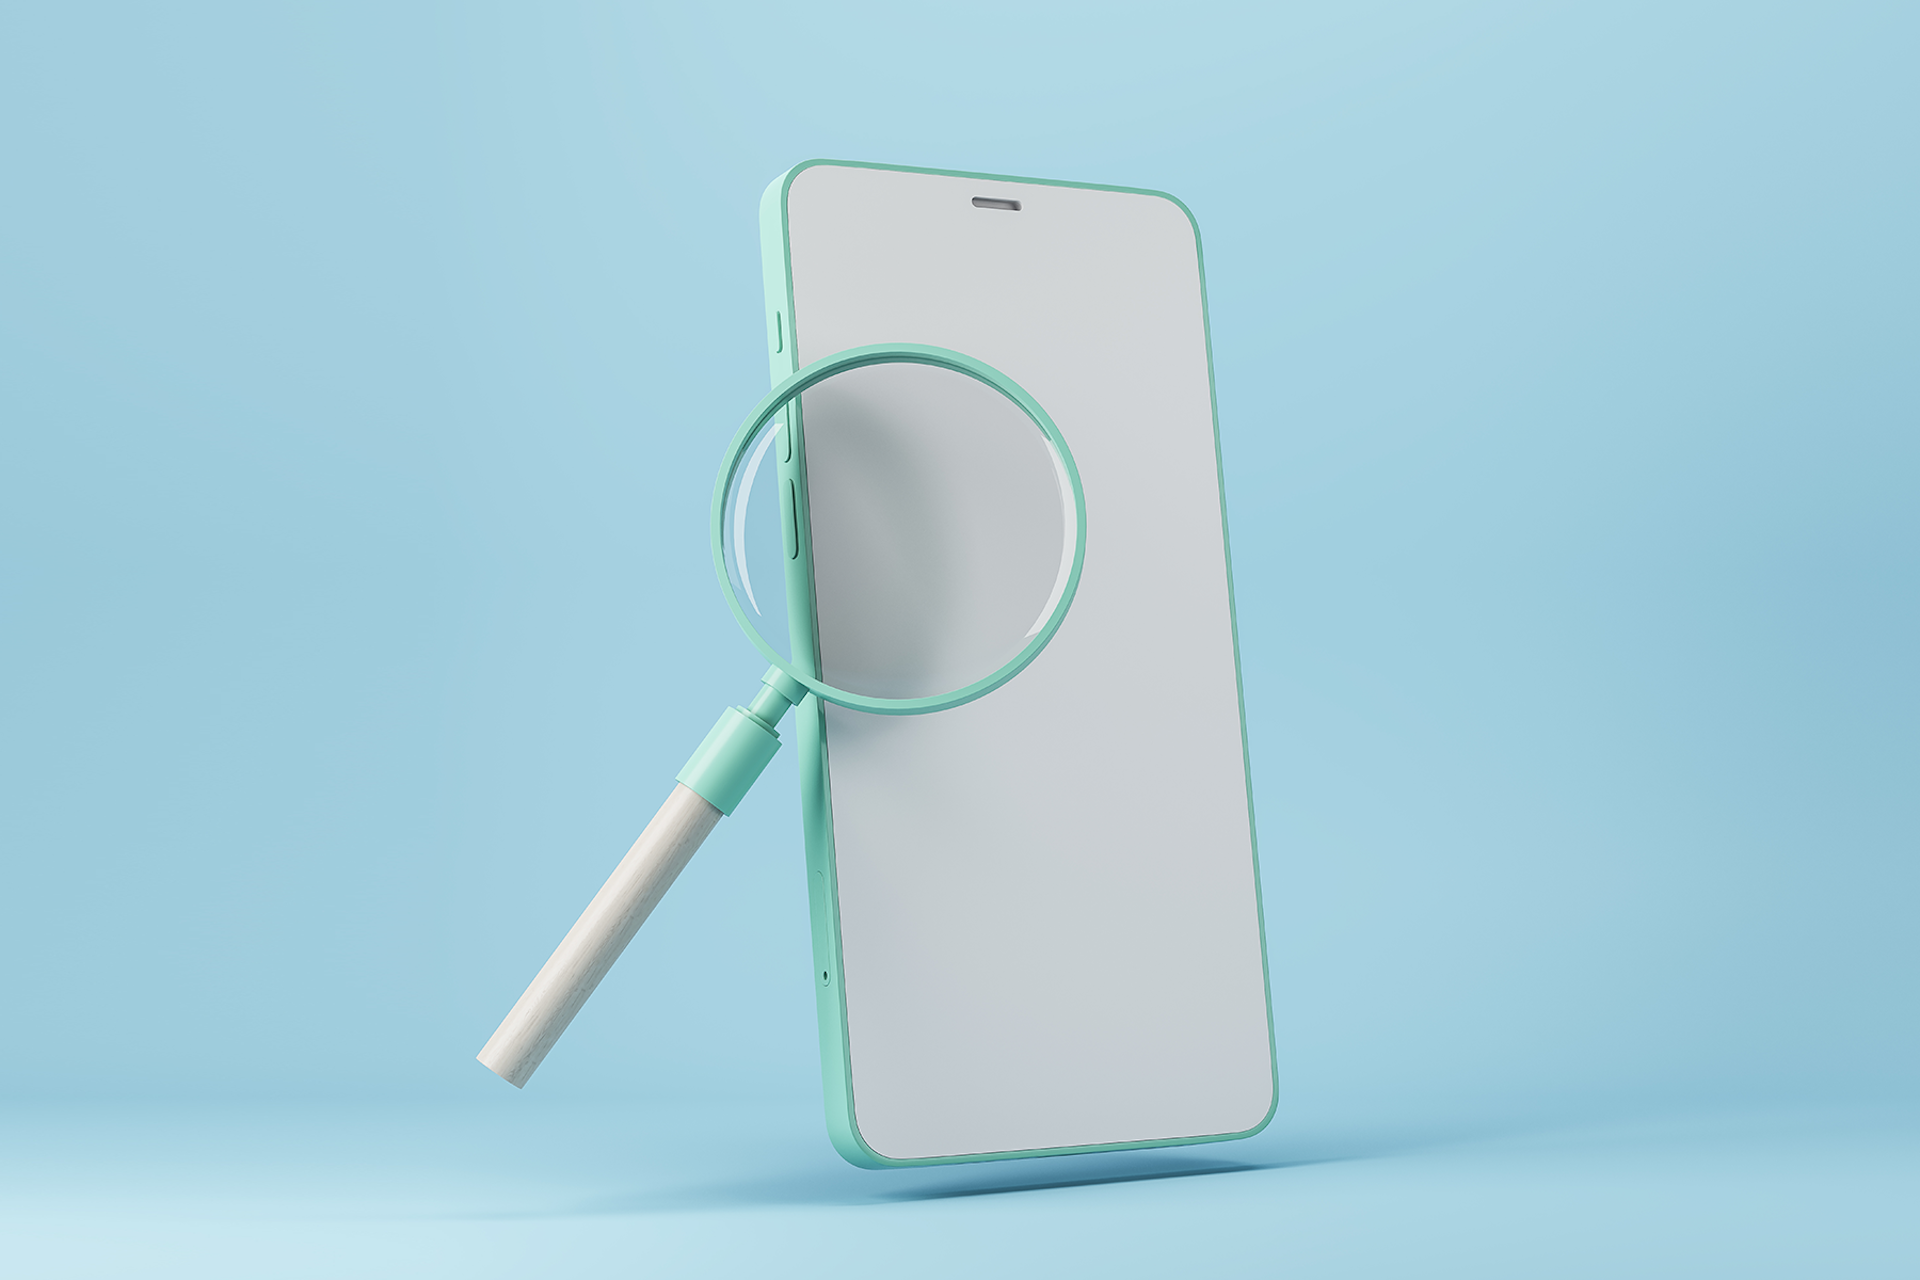 Illustration showing a smartphone with a magnifying glass in front of it, on a pale blue background